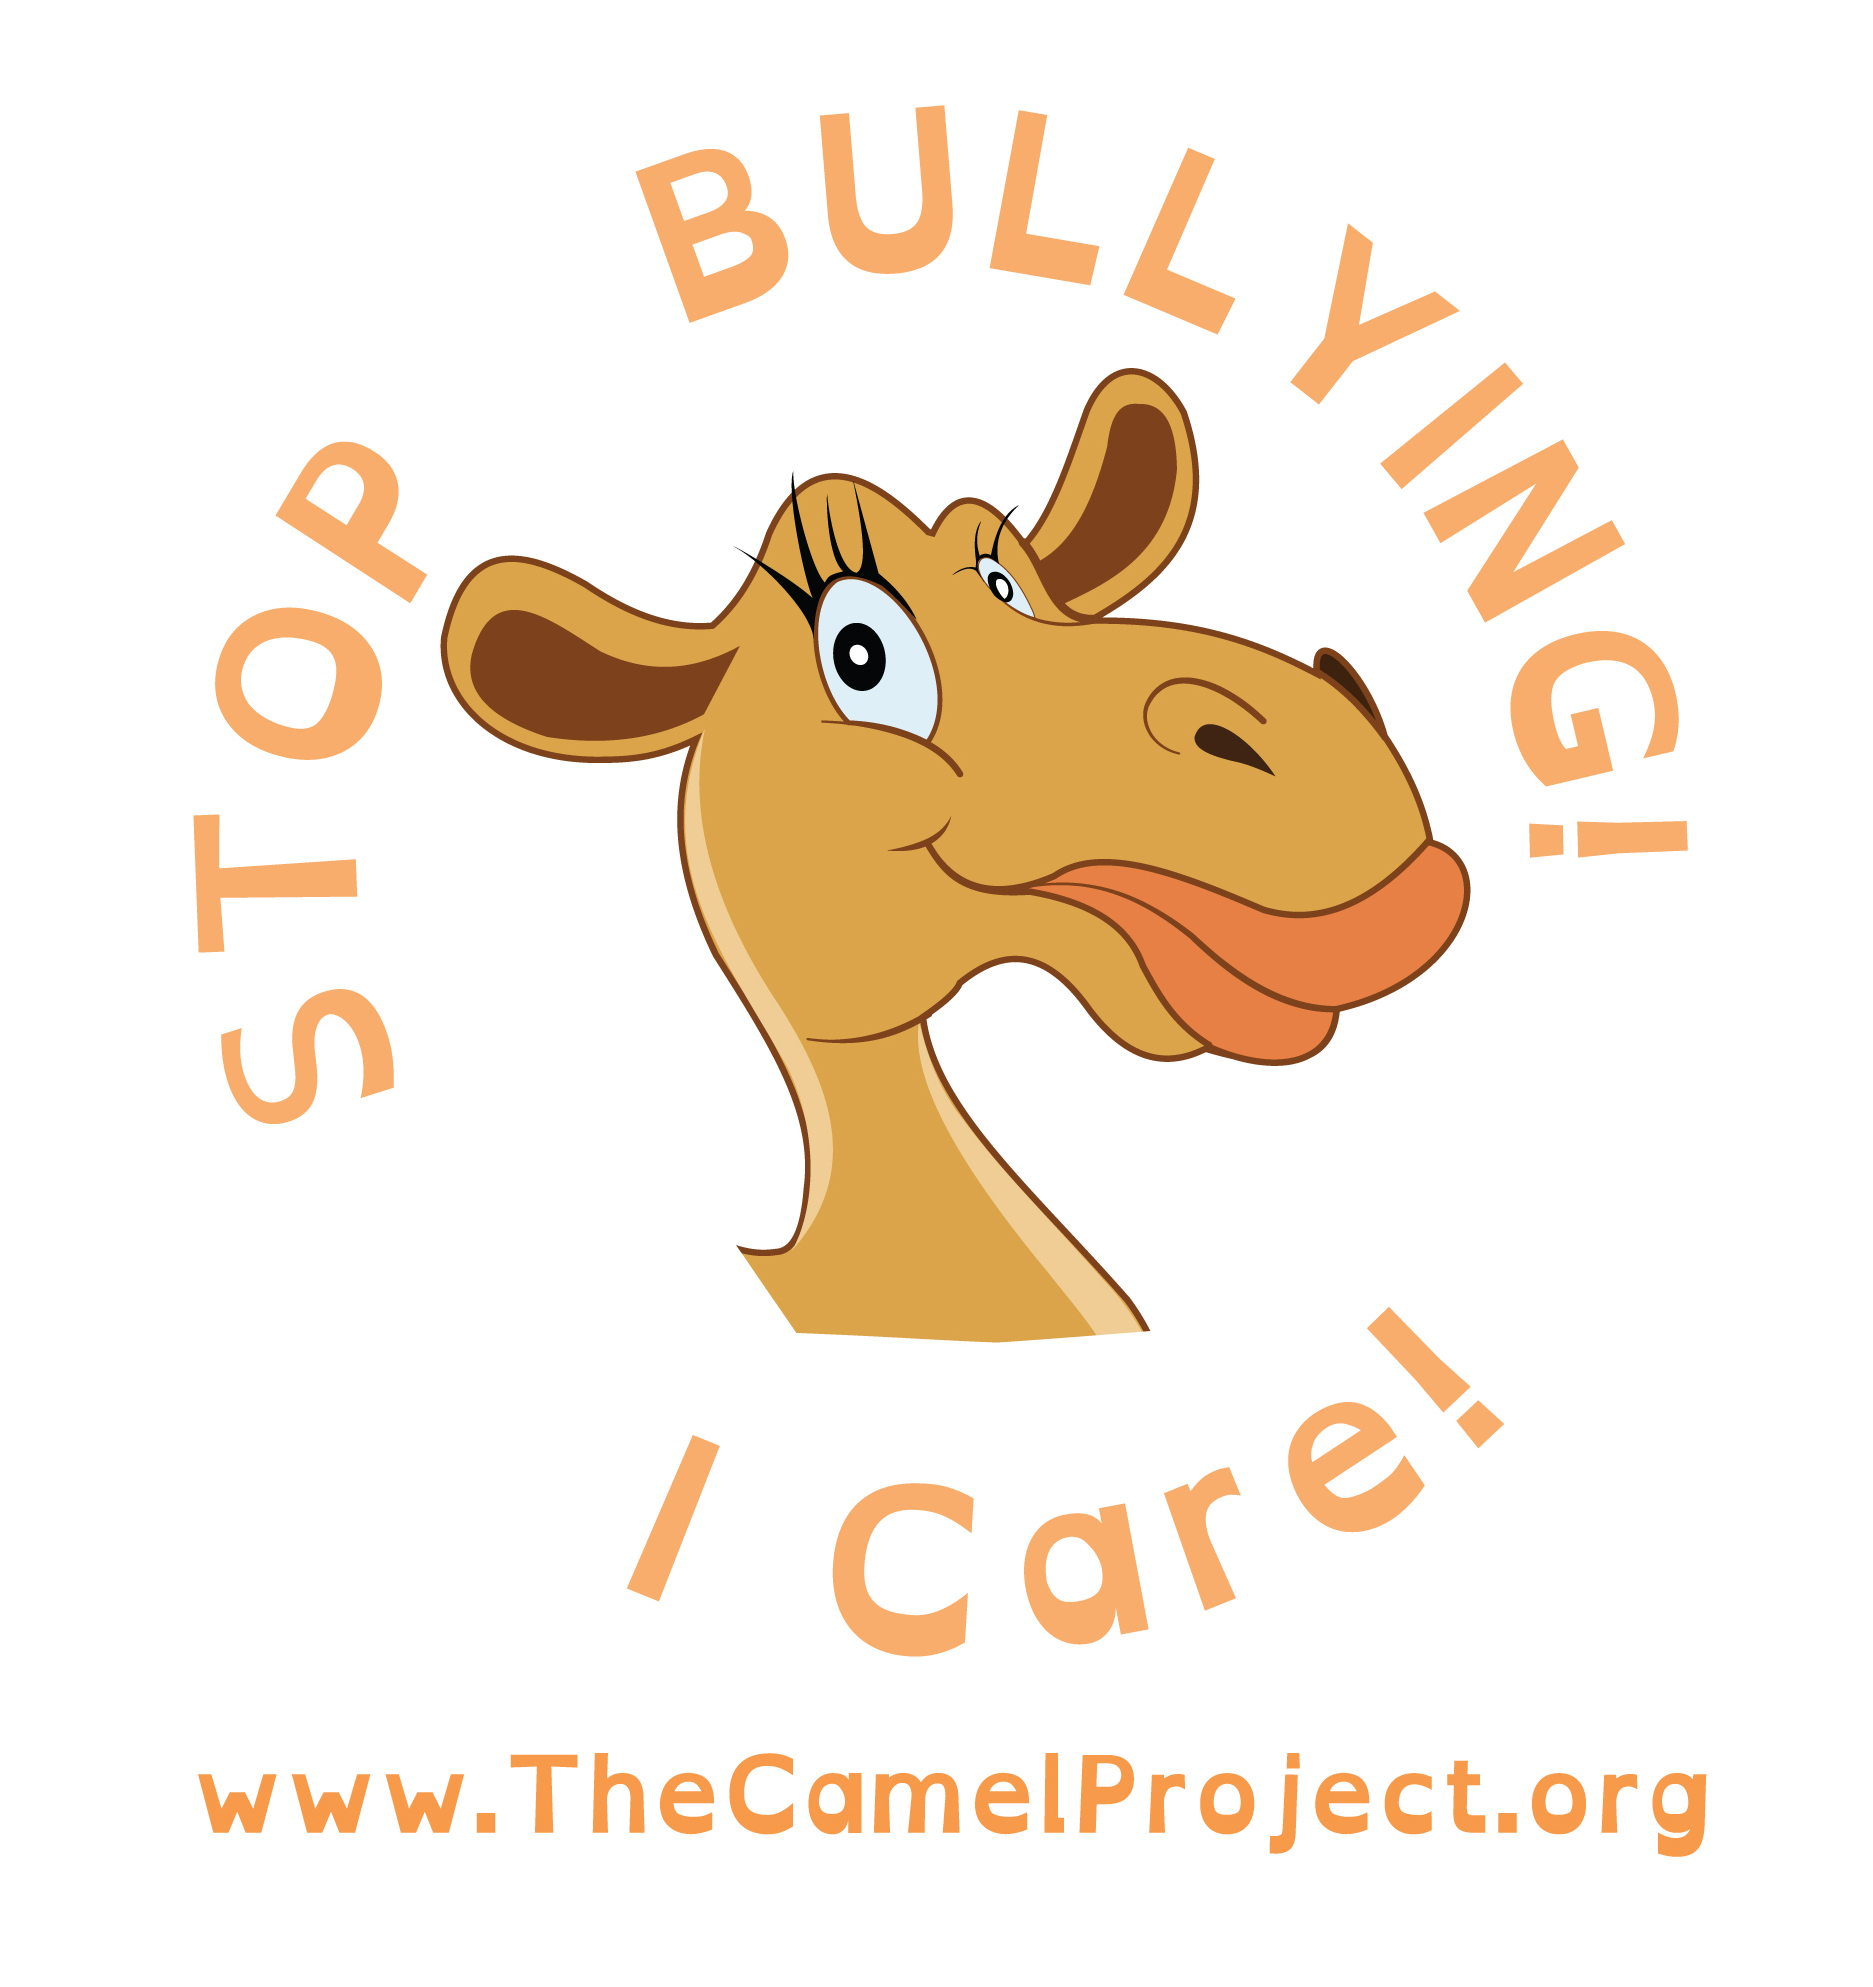 The Camel Project logo